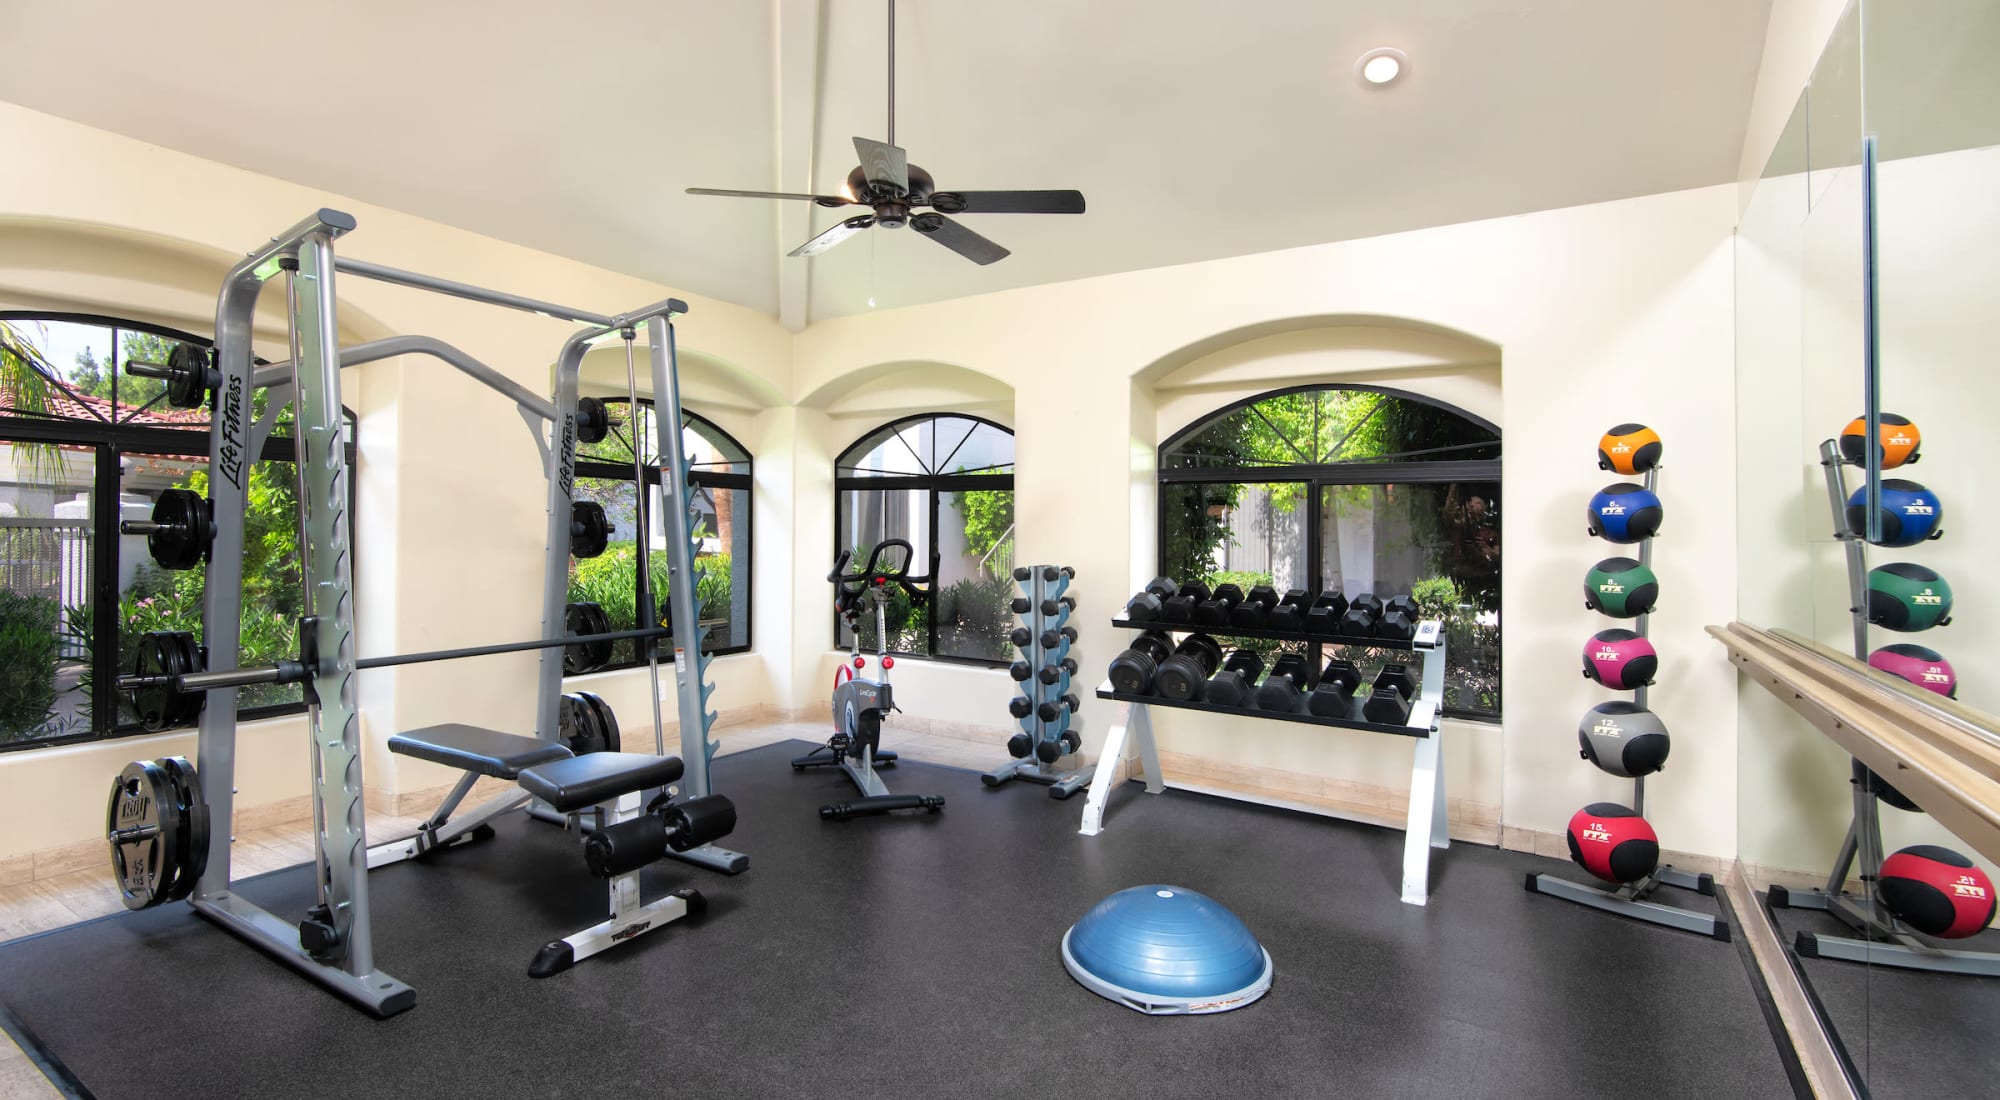 Fitness center at San Antigua in McCormick Ranch